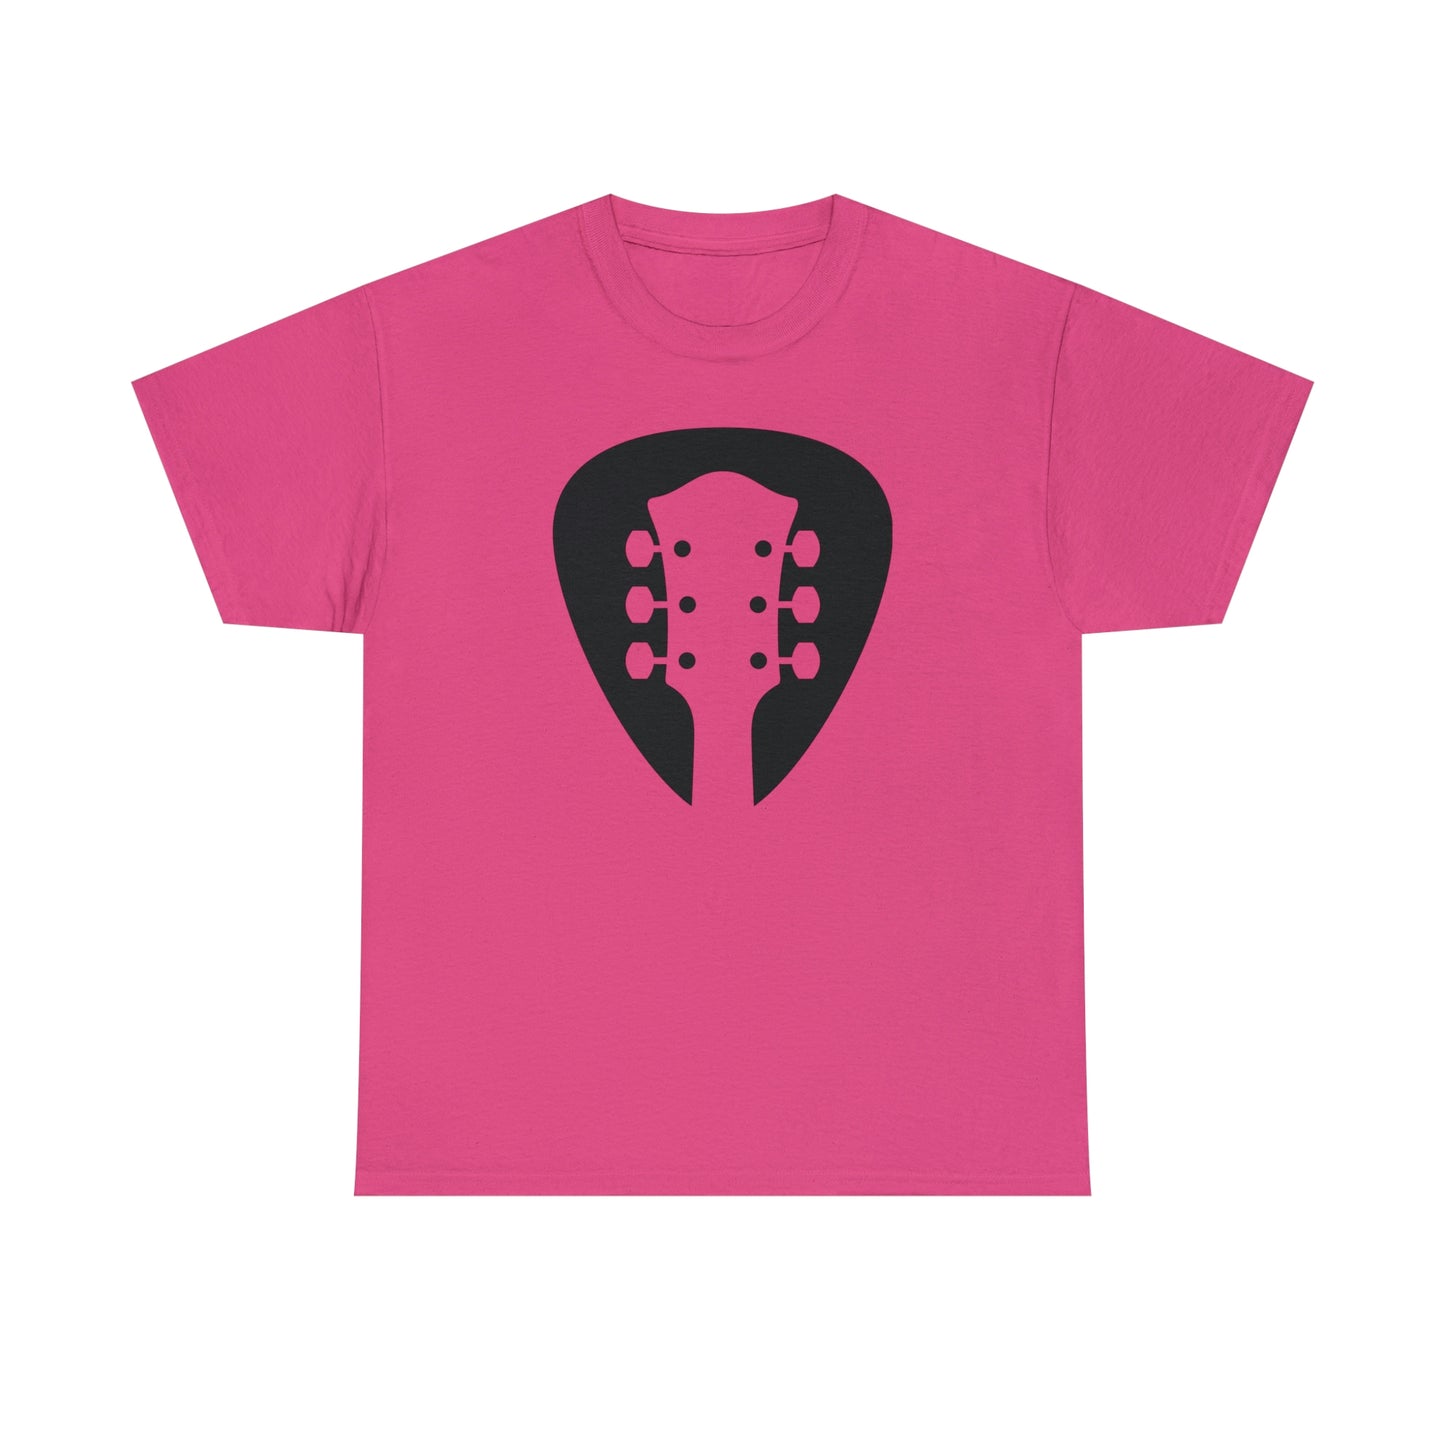 Headstock T-Shirt With Guitar Pick TShirt For Musician Shirt For Music Shirt For Guitar Player T Shirt For Live Music Shirt For Guitar Player Gifts For Musician Gift